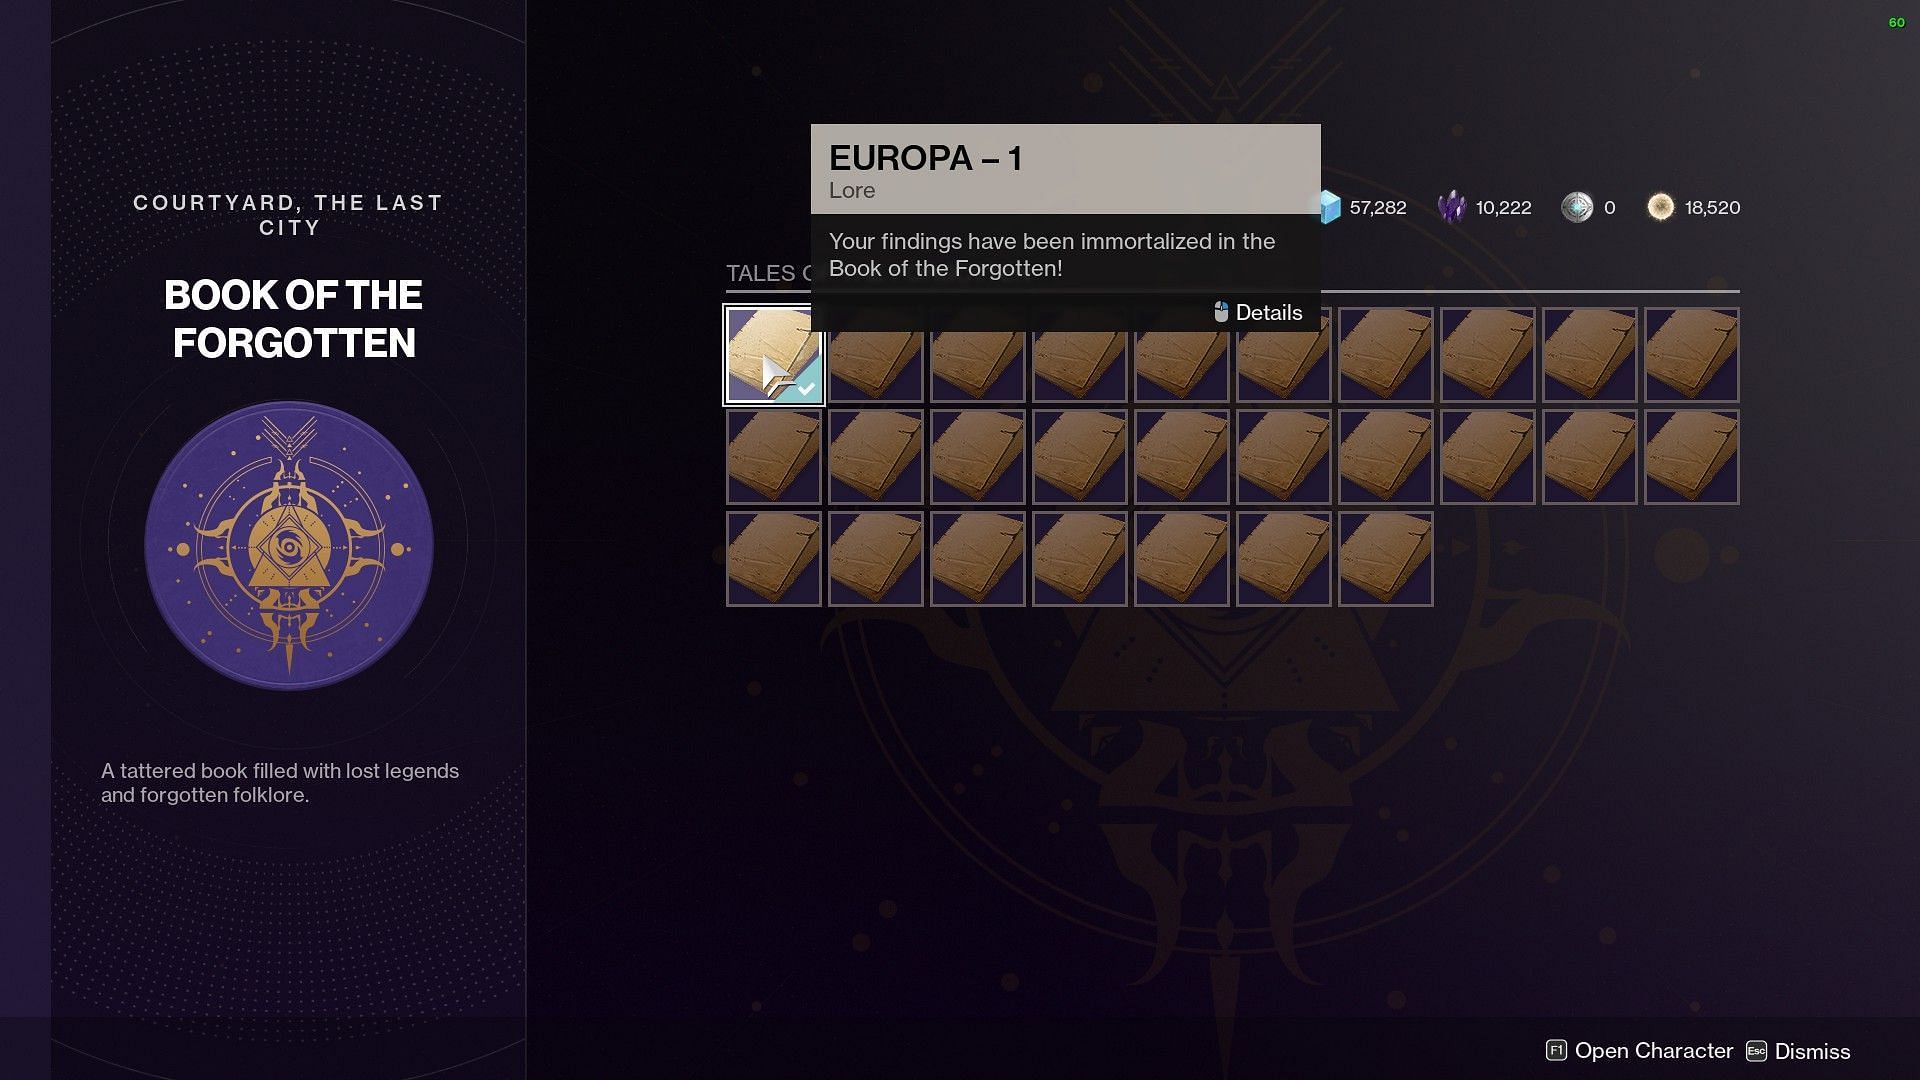 Europa-1 Lore page in the Book of the Forgotten (Image via Bungie)